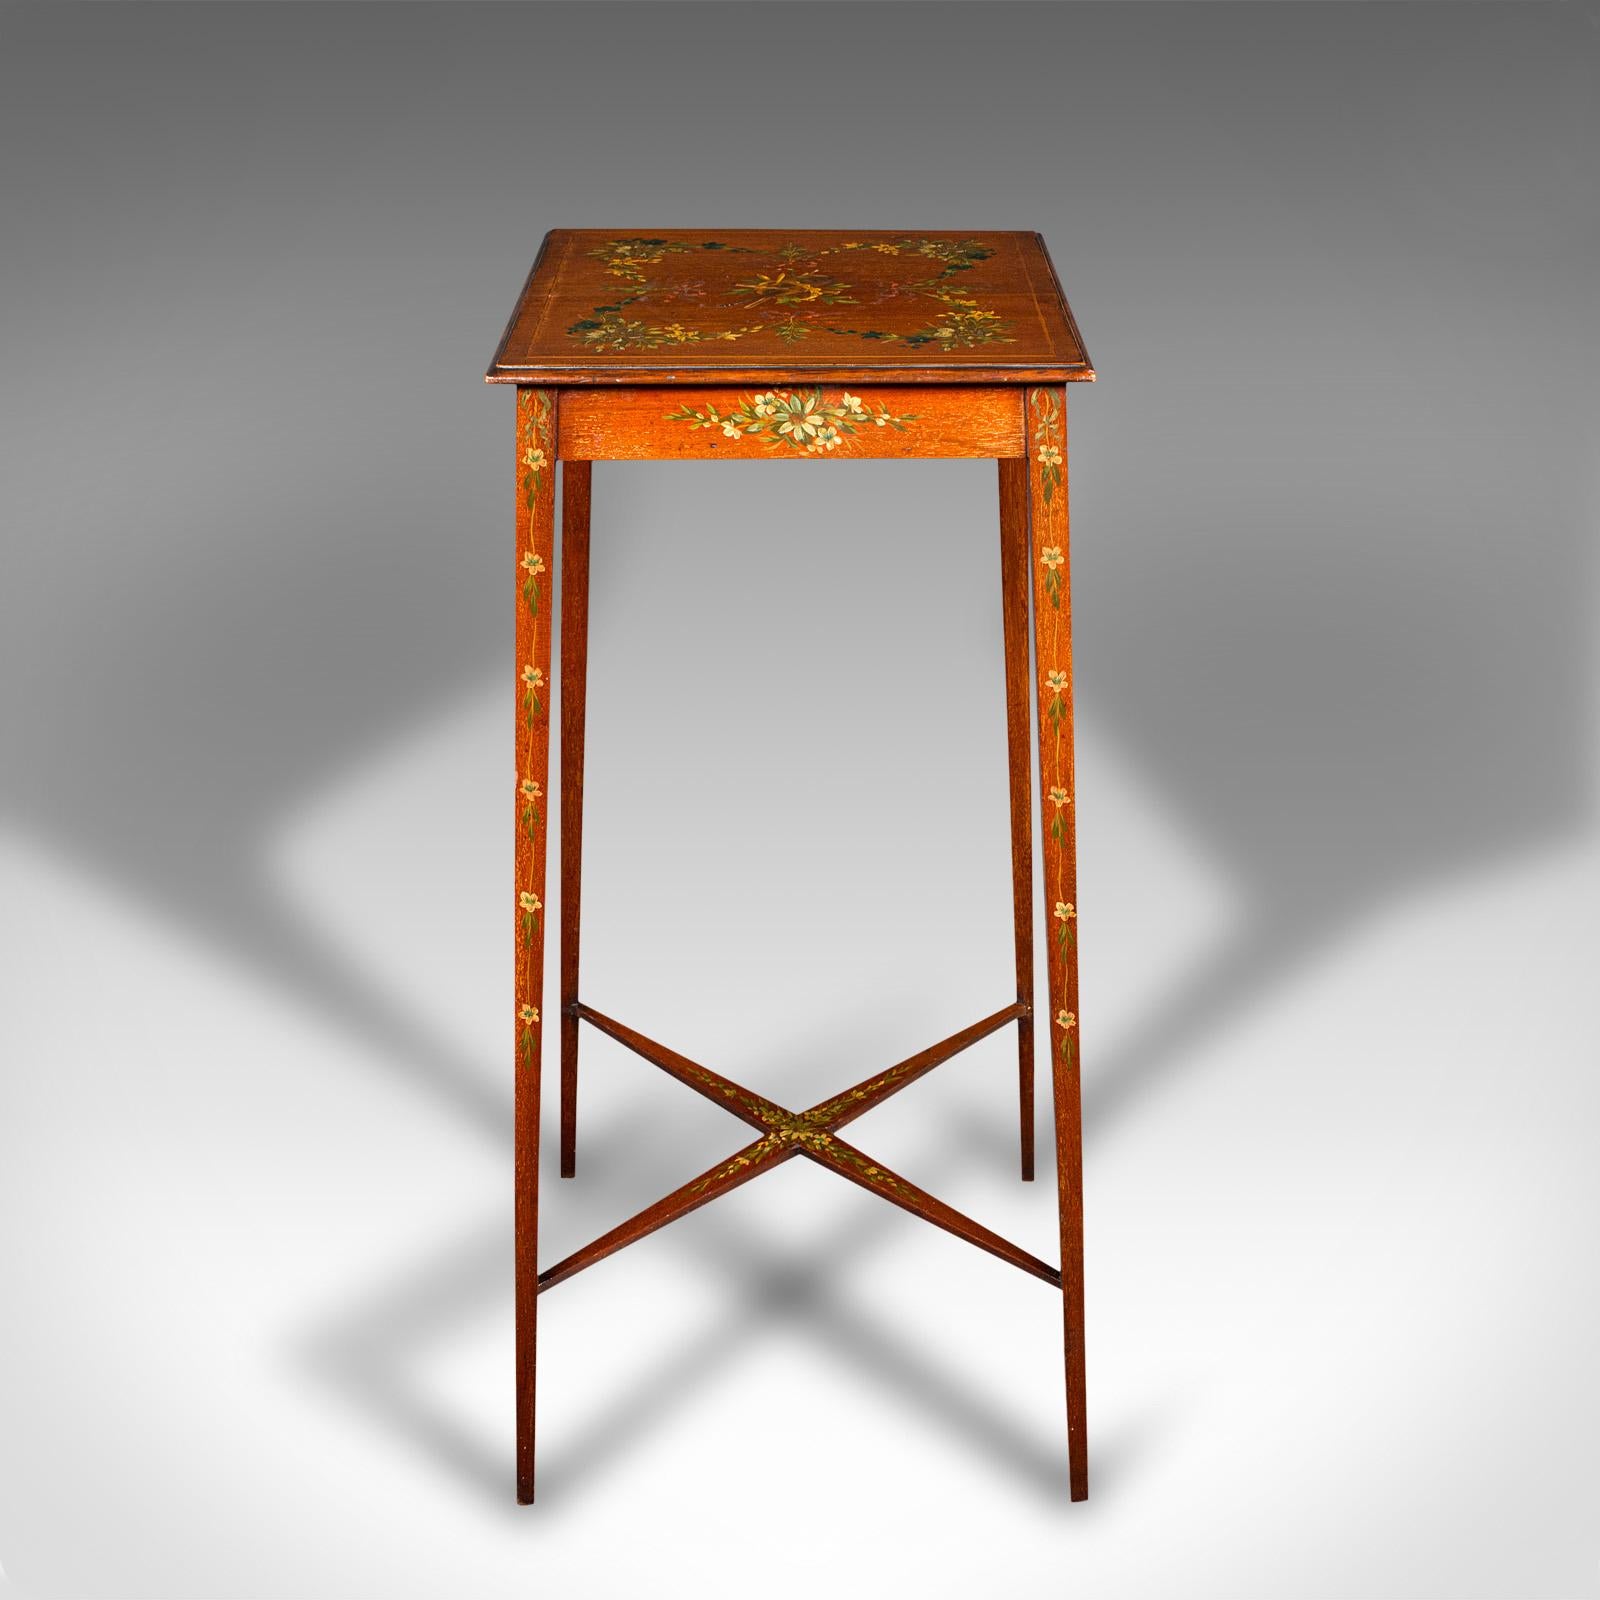 British Small Antique Lamp Table, English, Occasional, Hand Painted Decor, Regency, 1820 For Sale